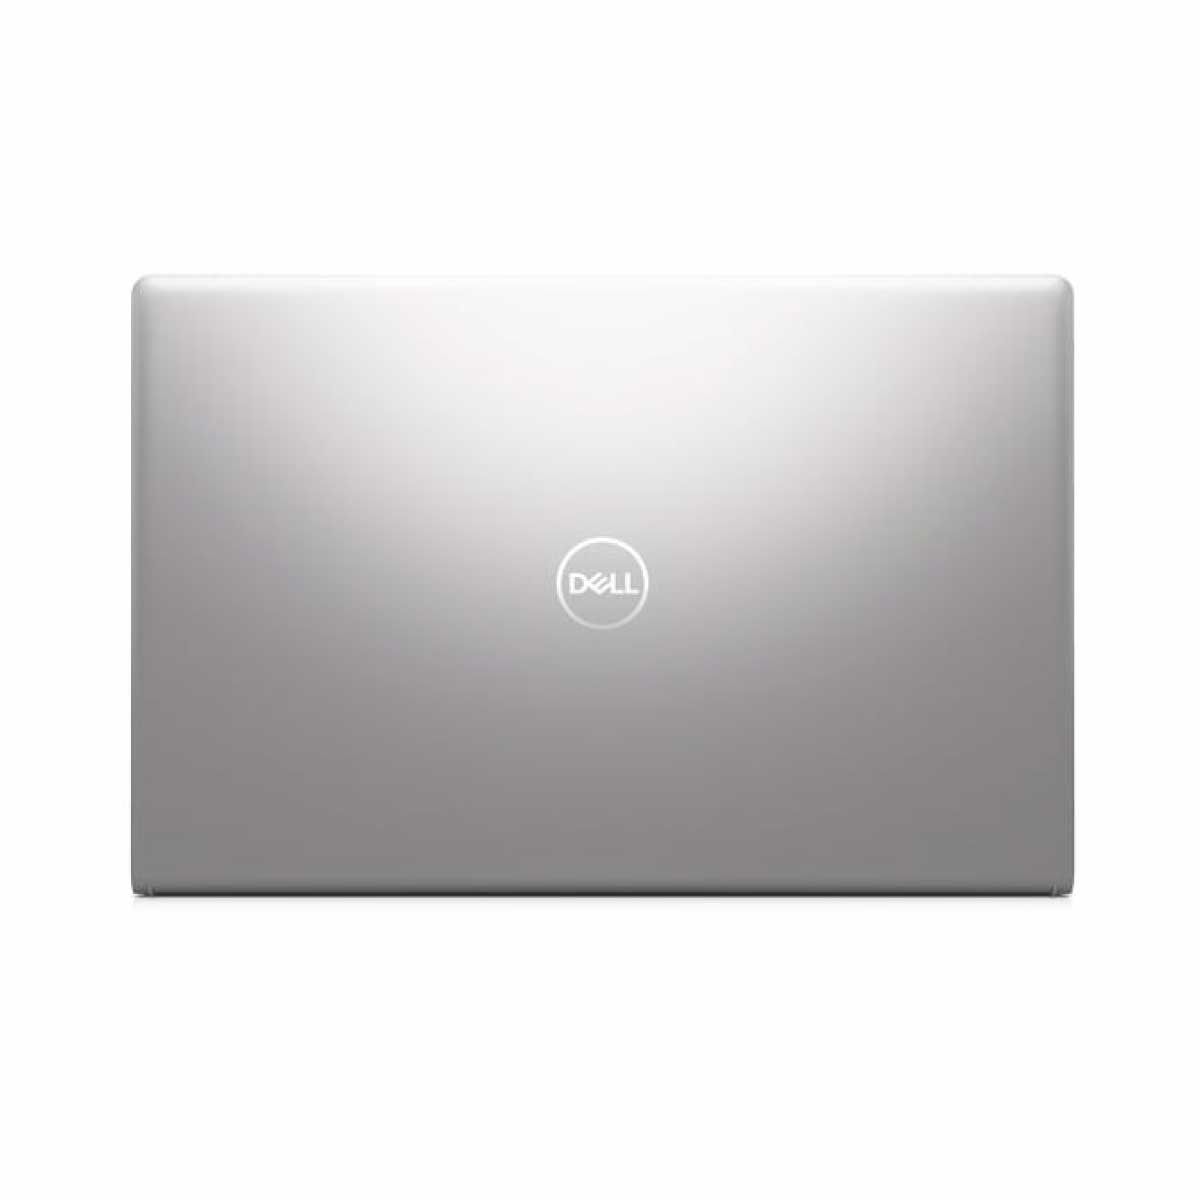 NOTEBOOK (โน้ตบุ๊ค) DELL INSPIRON 3530-OIN3530100701GTH (Platinum Silver)